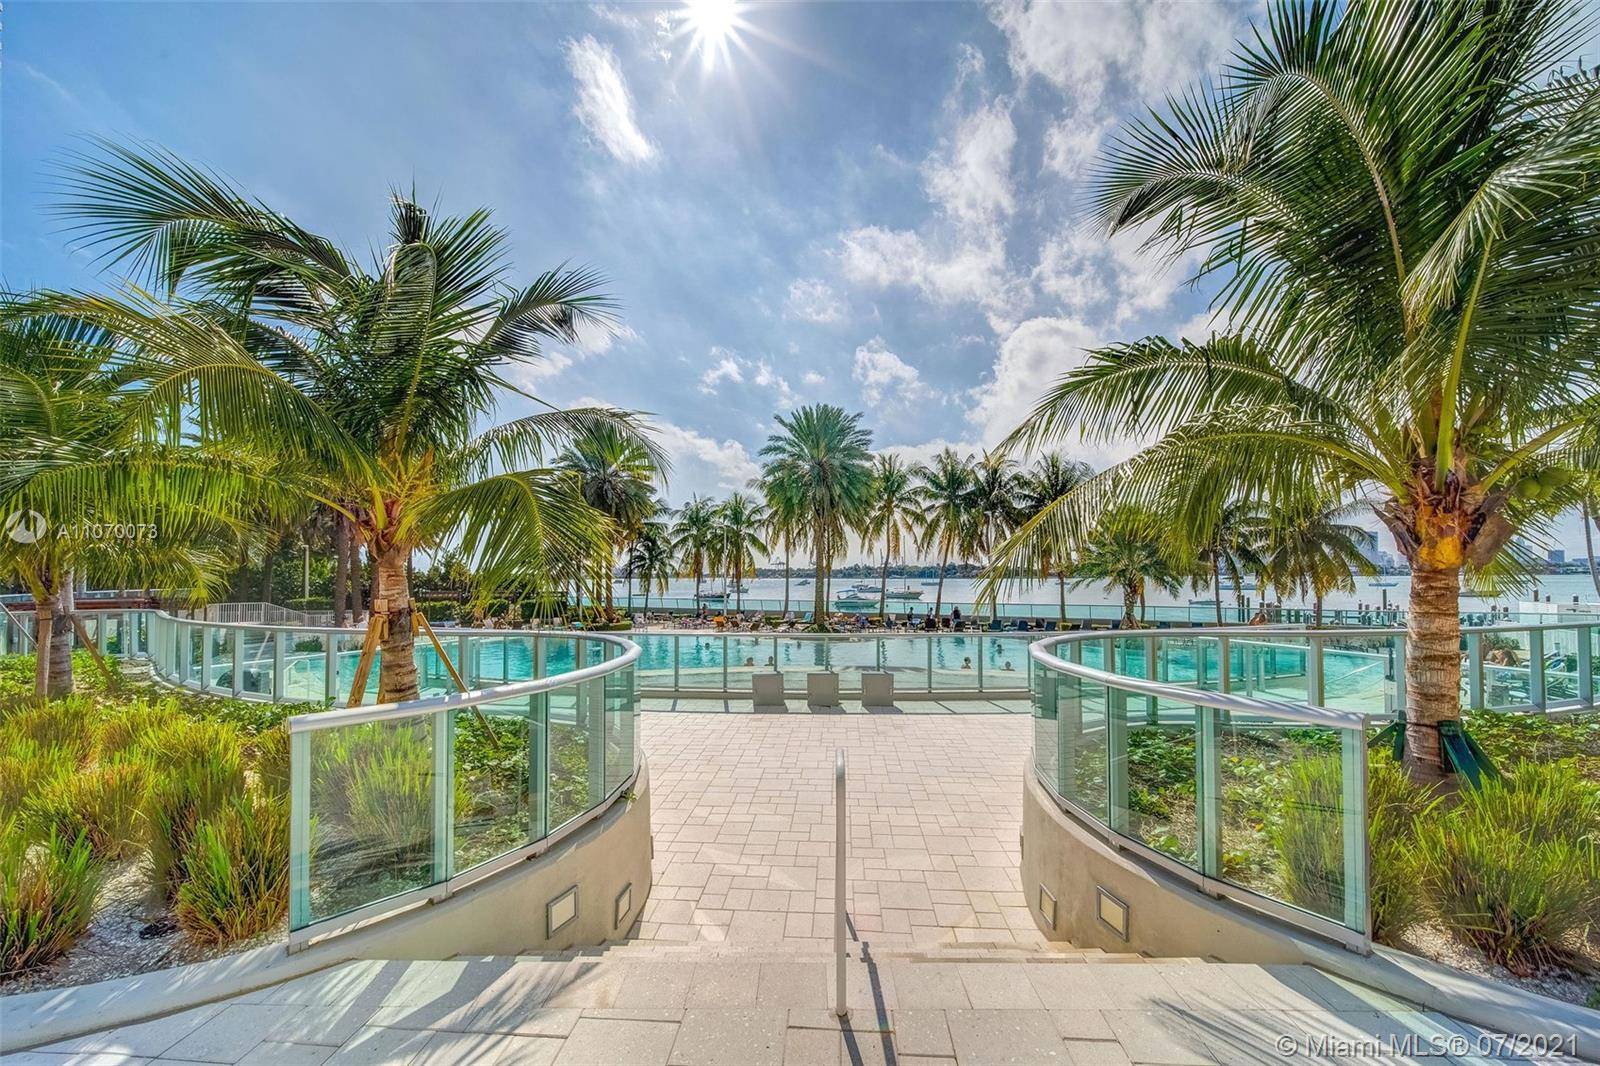 AVAILABLE 12 20. Welcome to Miami Beach's residential community, Flamingo Point.